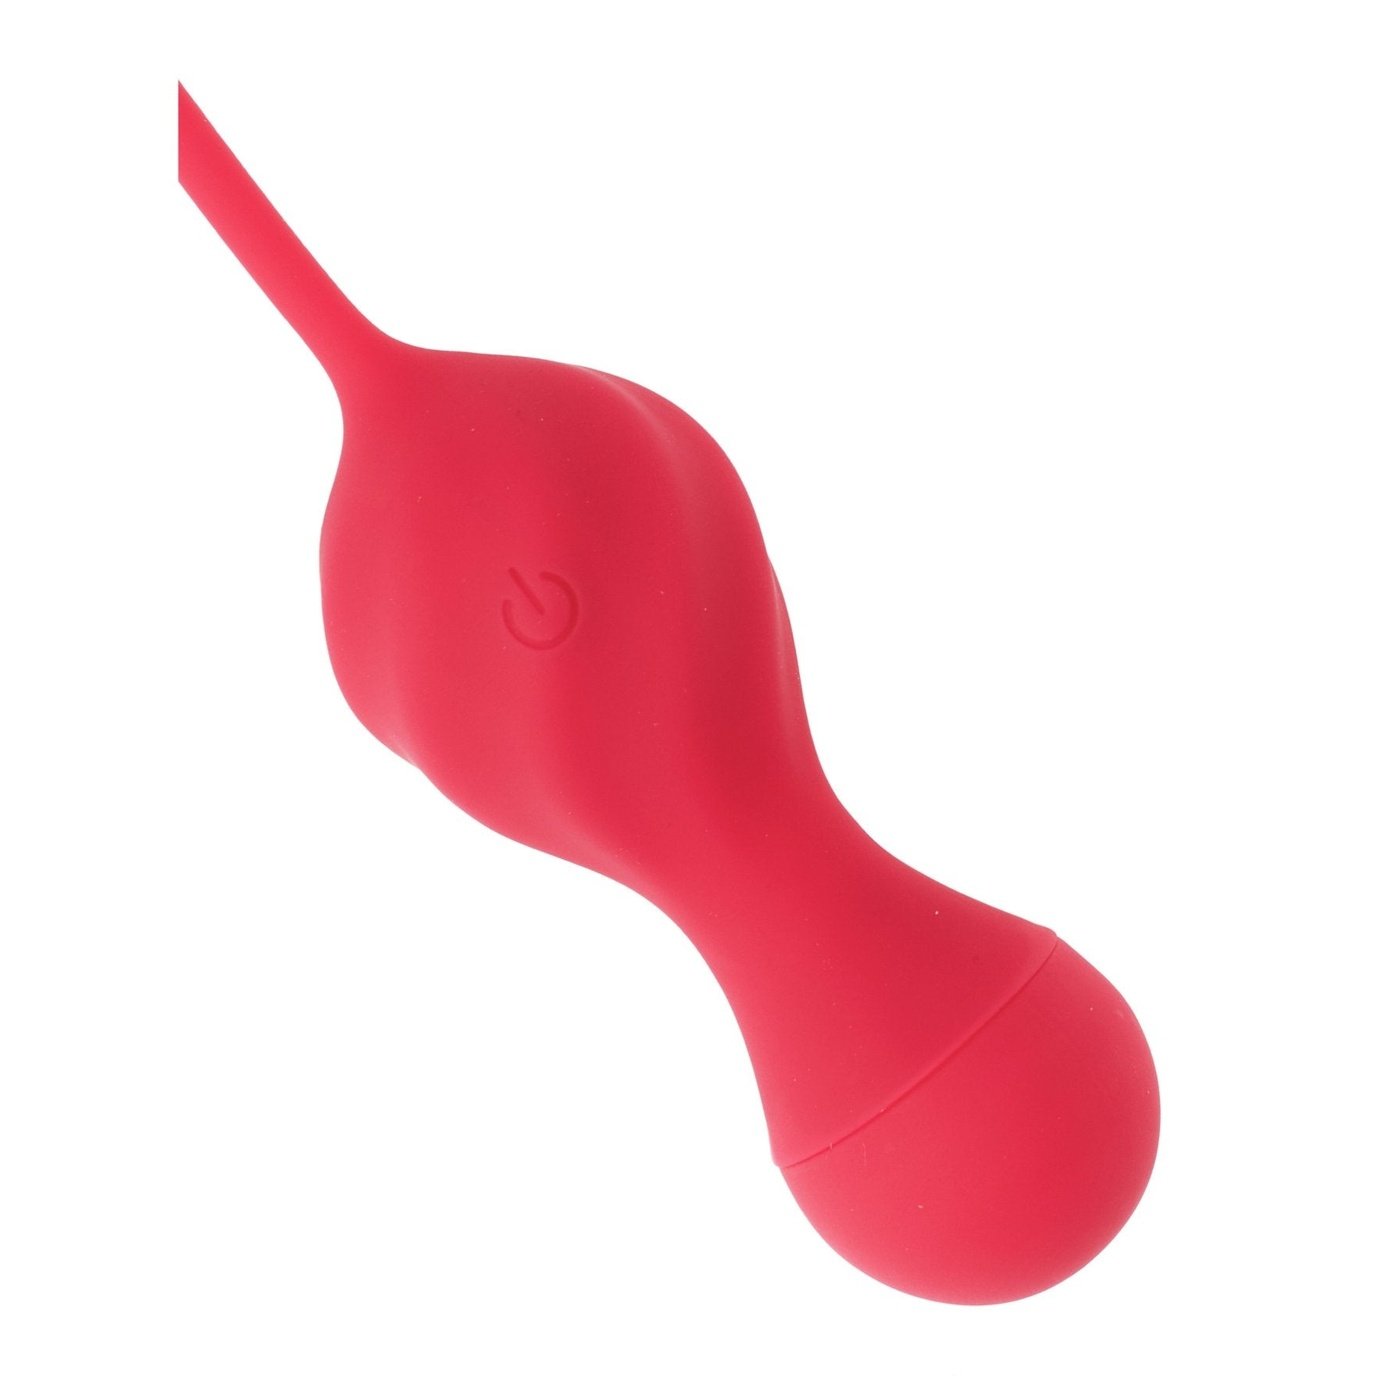 Eyden Remote Controlled Kegel Trainer with Circle Cord - The Pleasure Is Mine